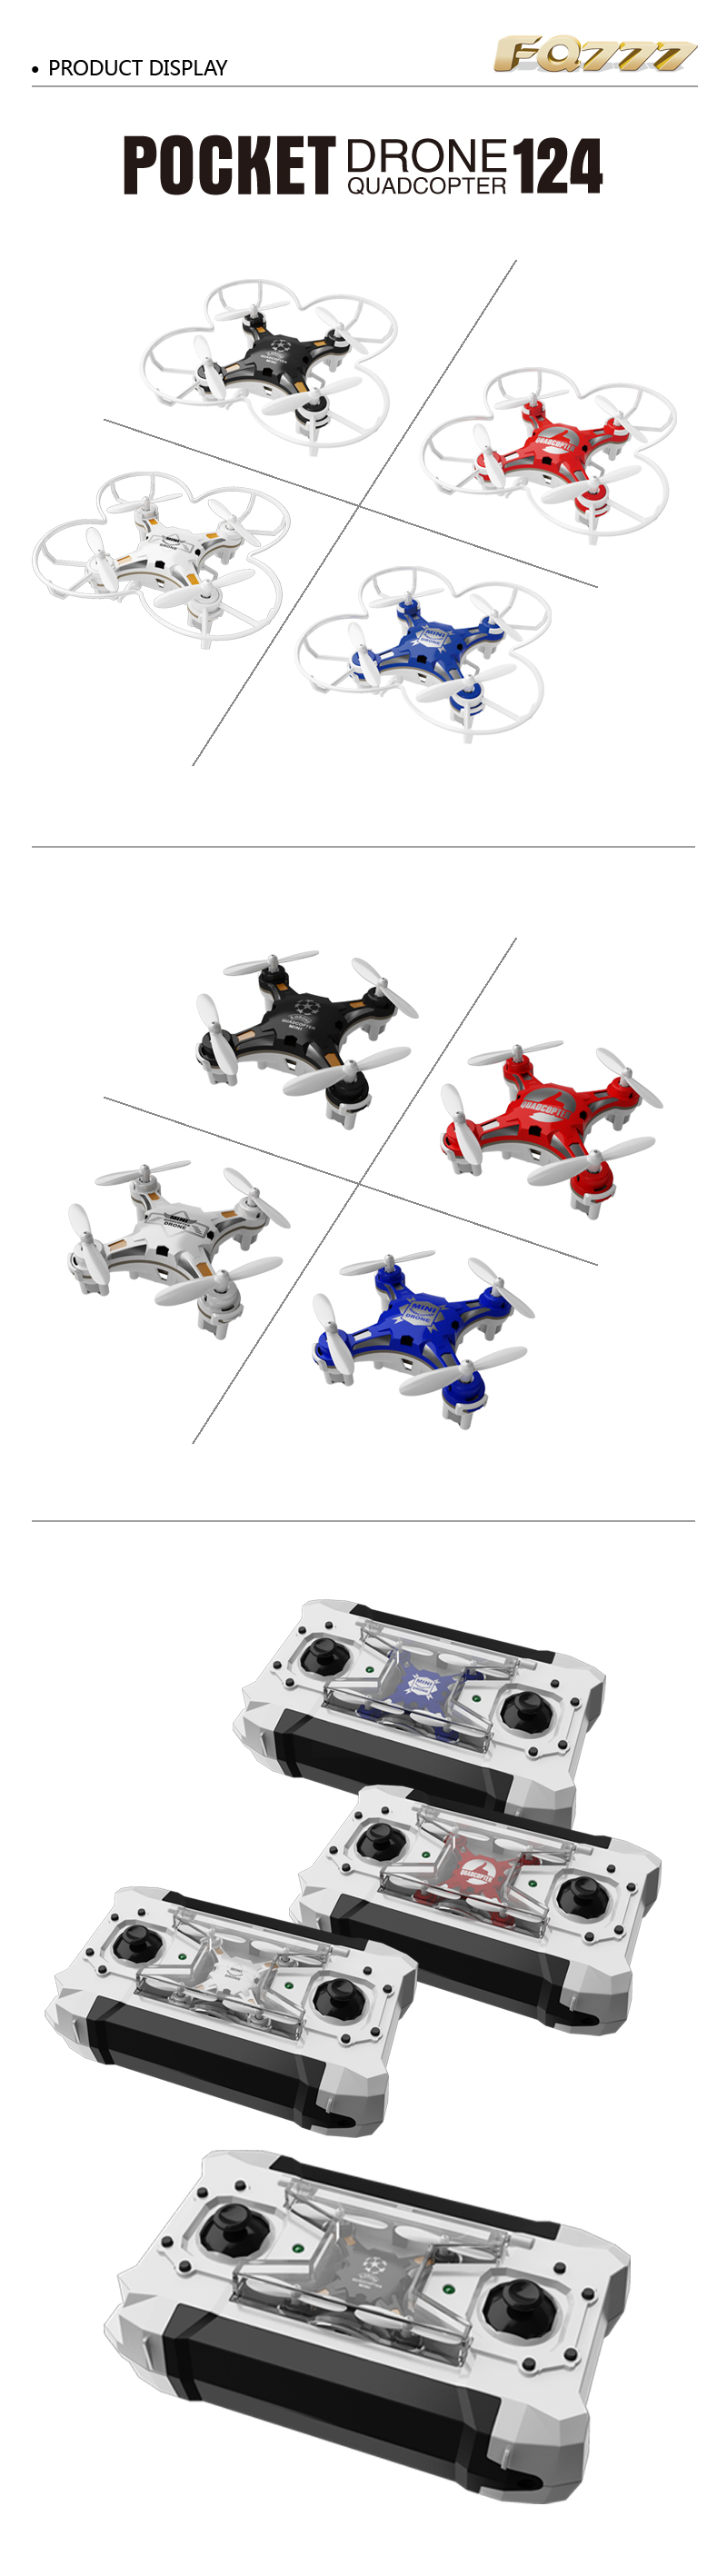 FQ777-124-Pocket-Drone-4CH-6Axis-Gyro-Drone-Quadcopter-With-Switchable-Controller--RTF-977881